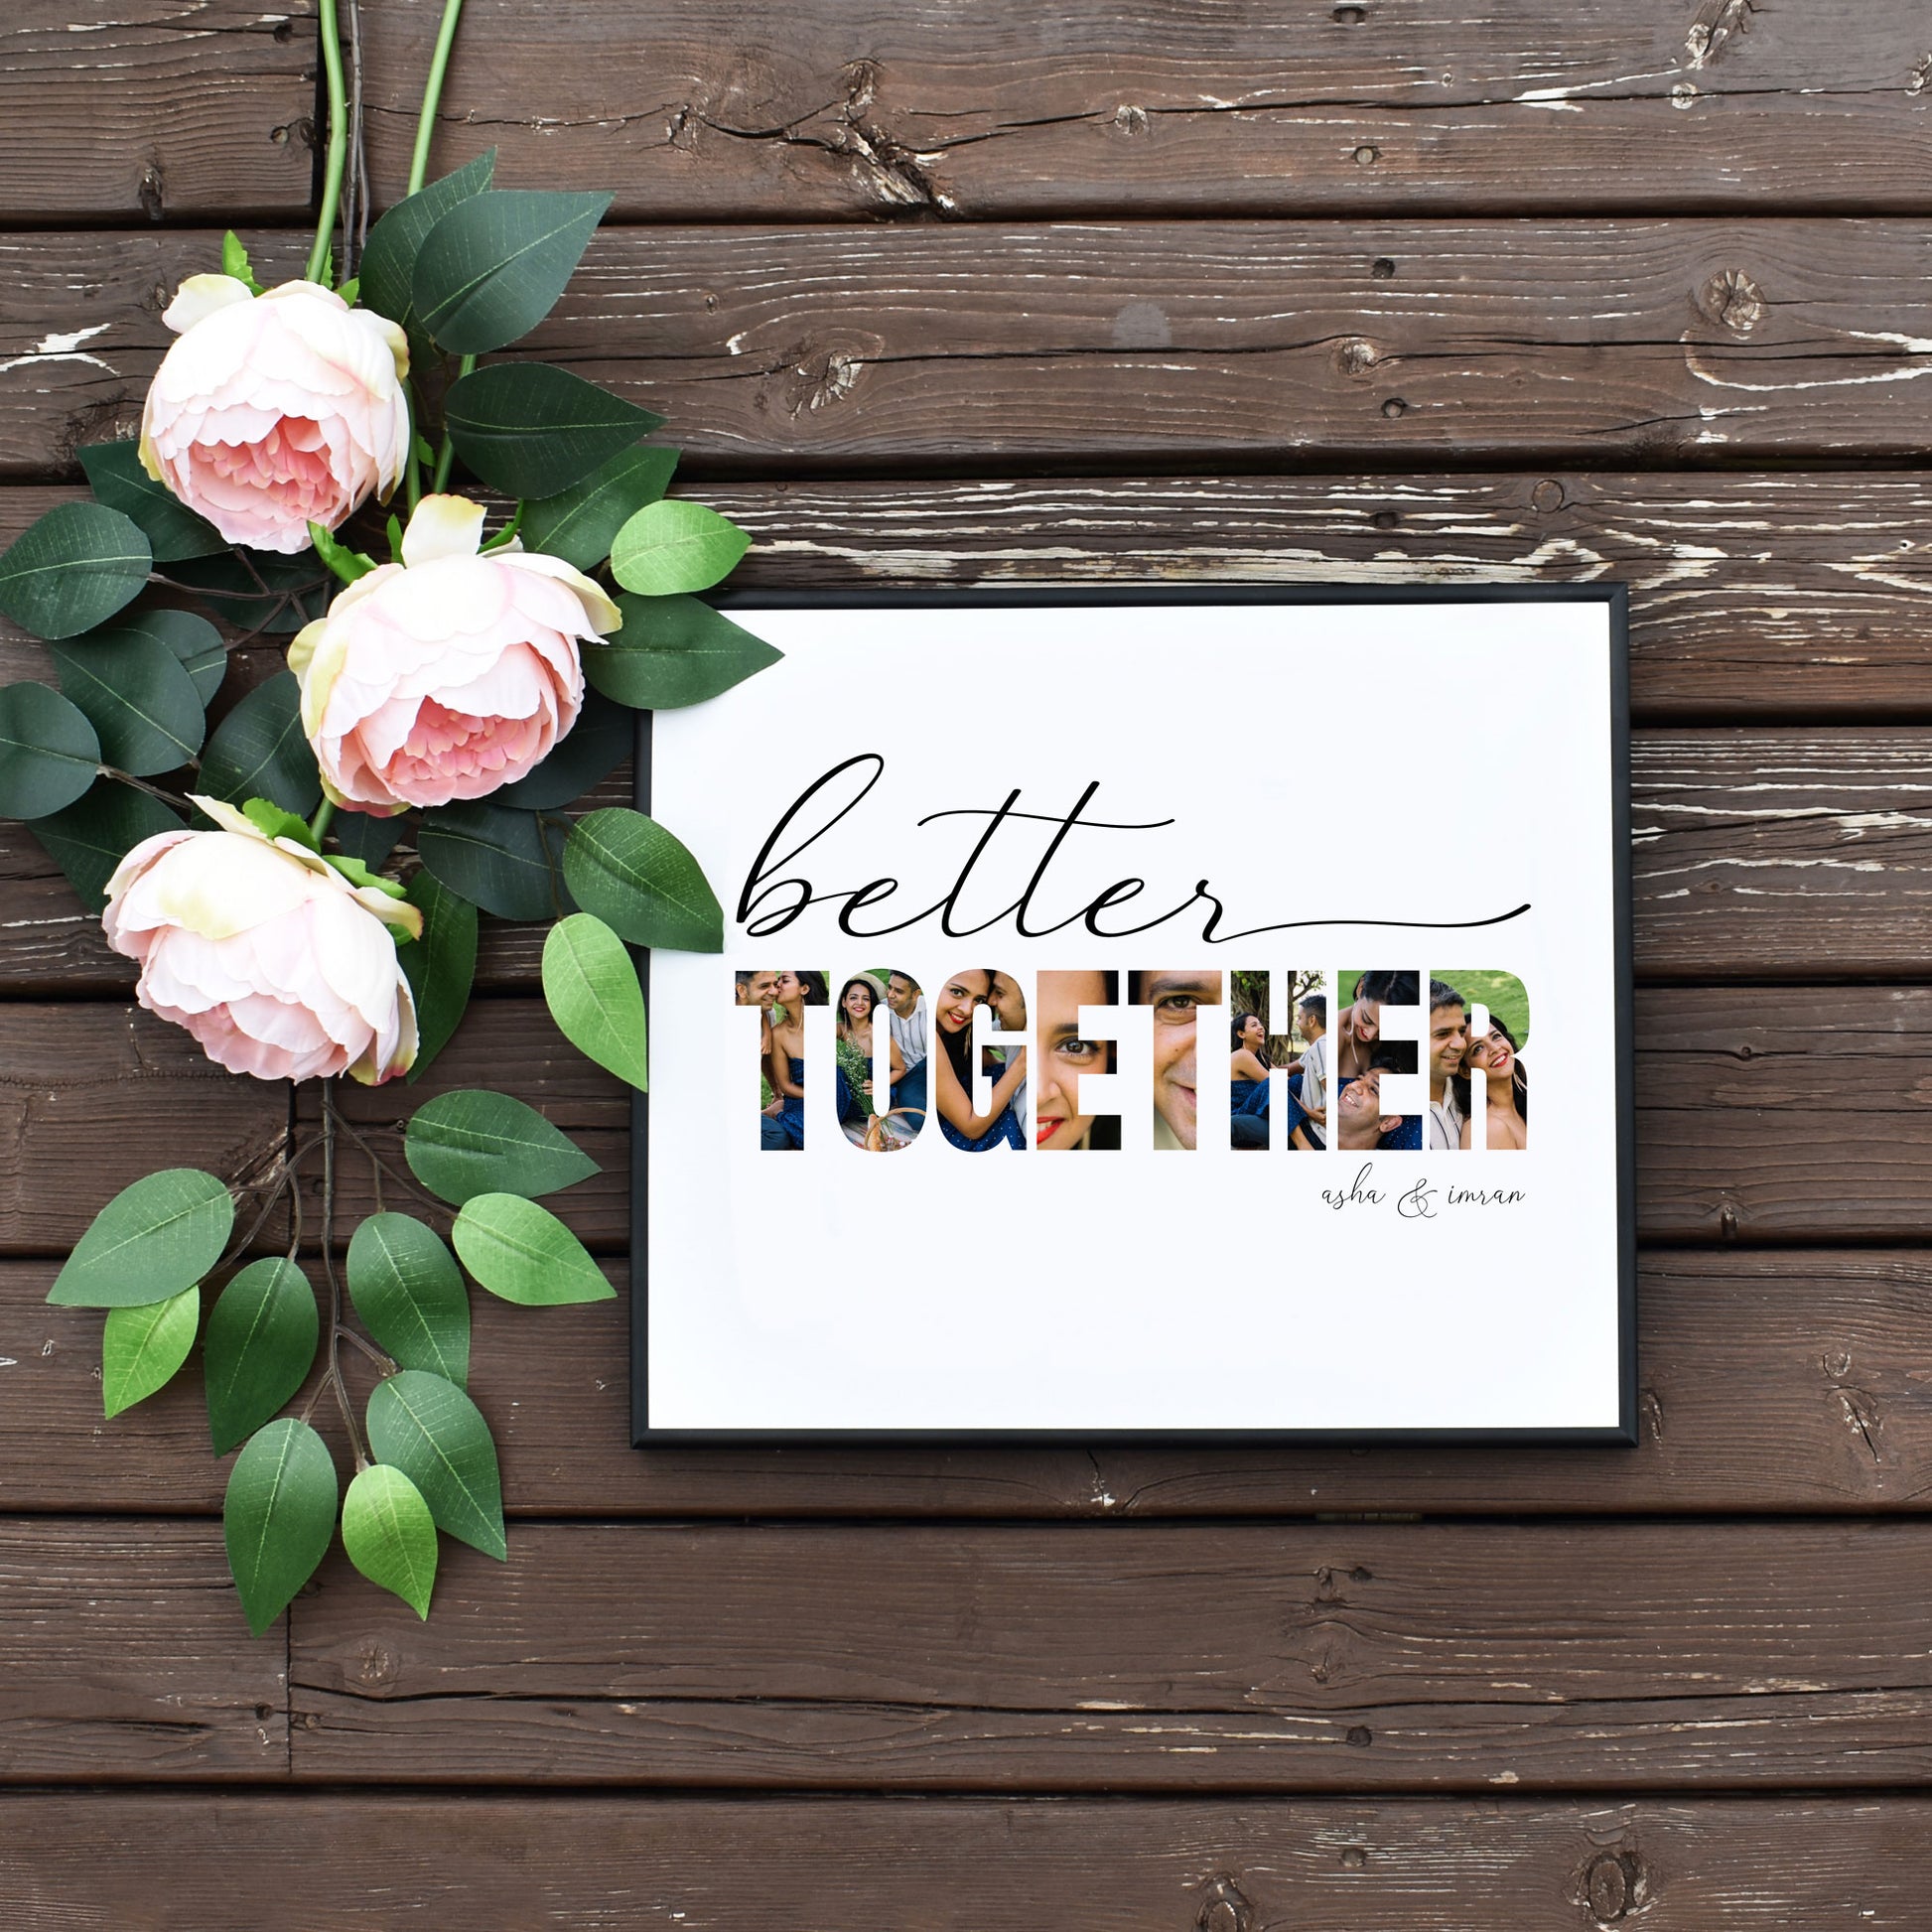 Better Together Editable Photo Collage Template by Playful Pixie Studio